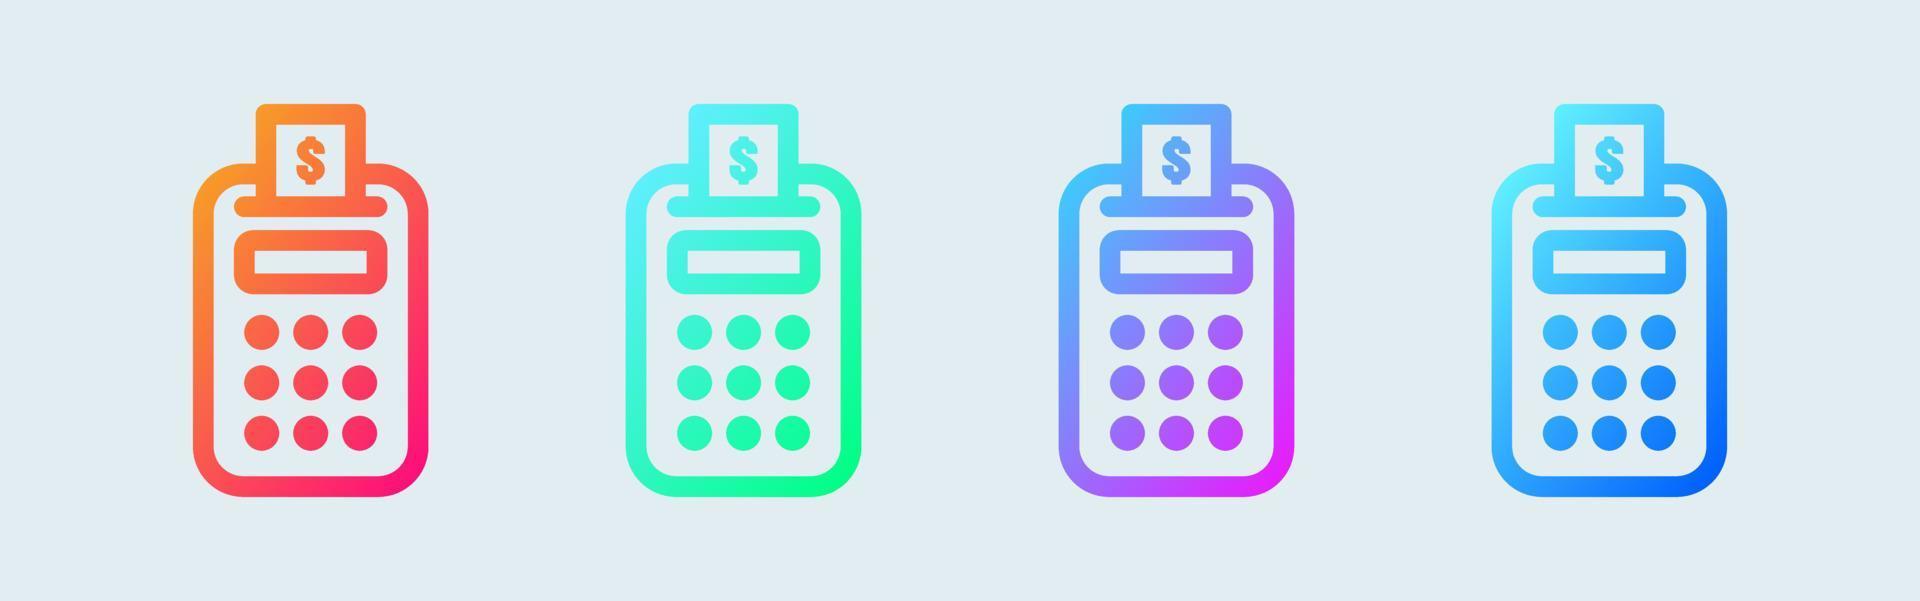 Cashier line icon in gradient colors. Finance signs vector illustration.